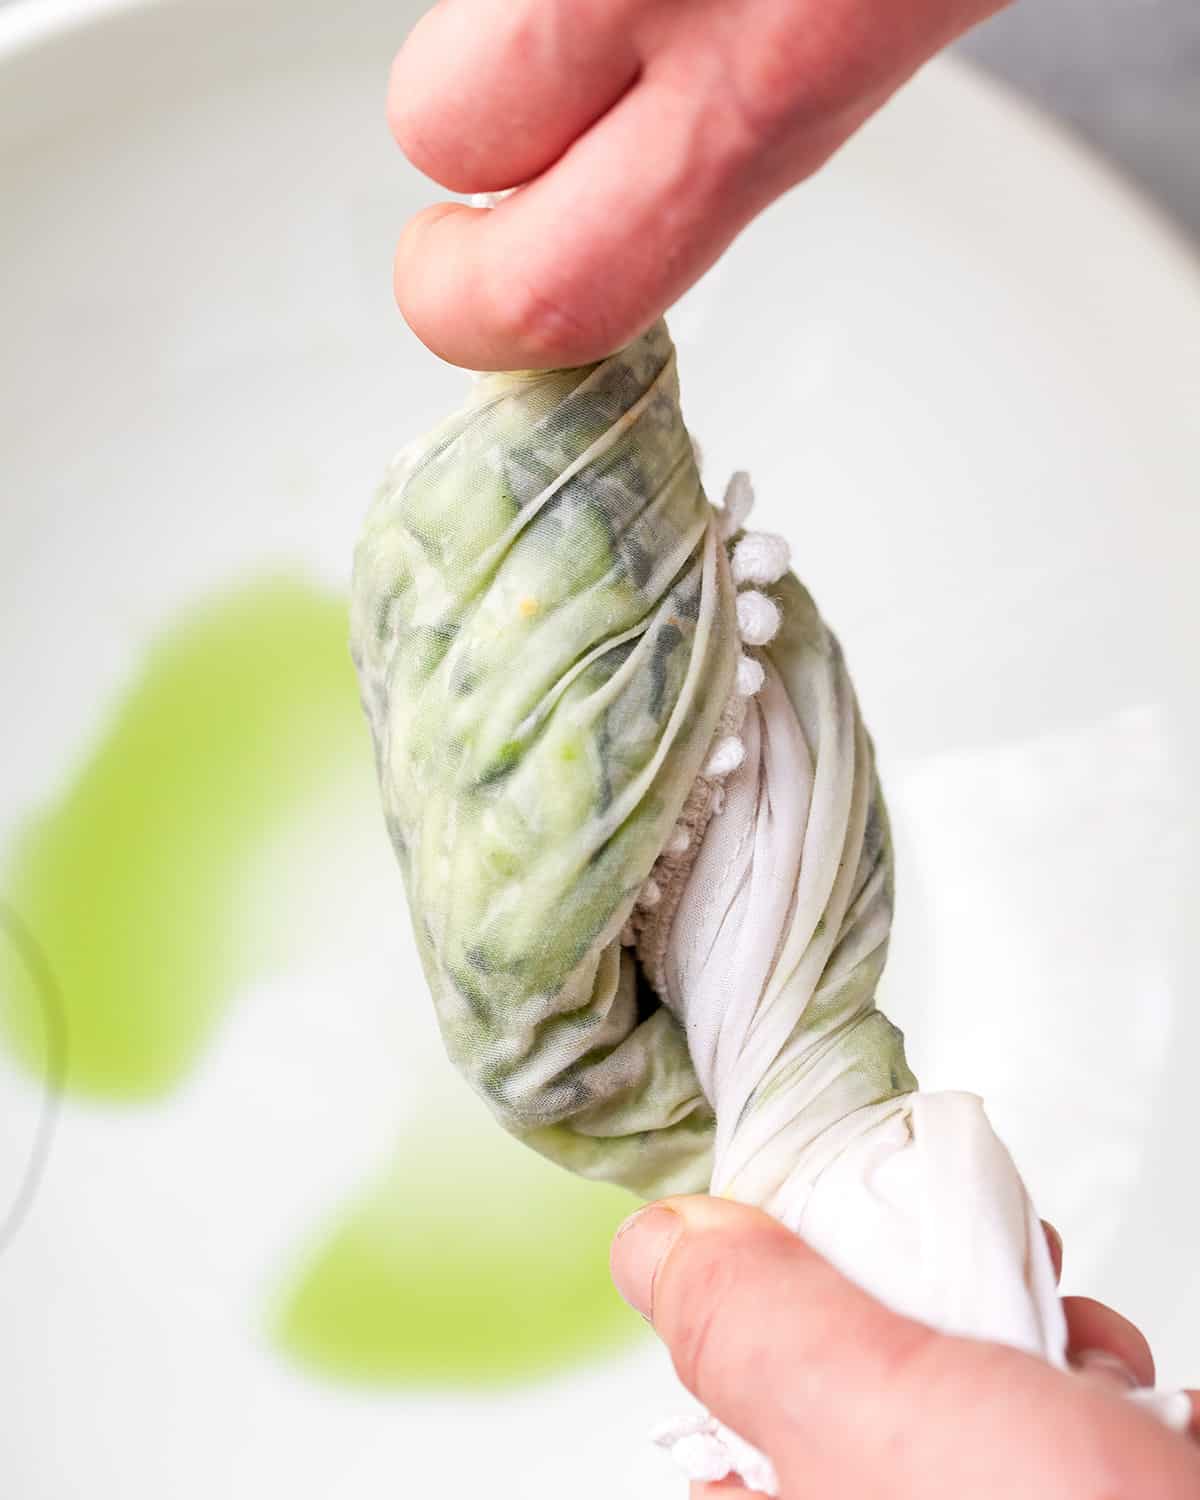 How to Make Tzatziki Sauce - ringing water out of cucumber in a towel